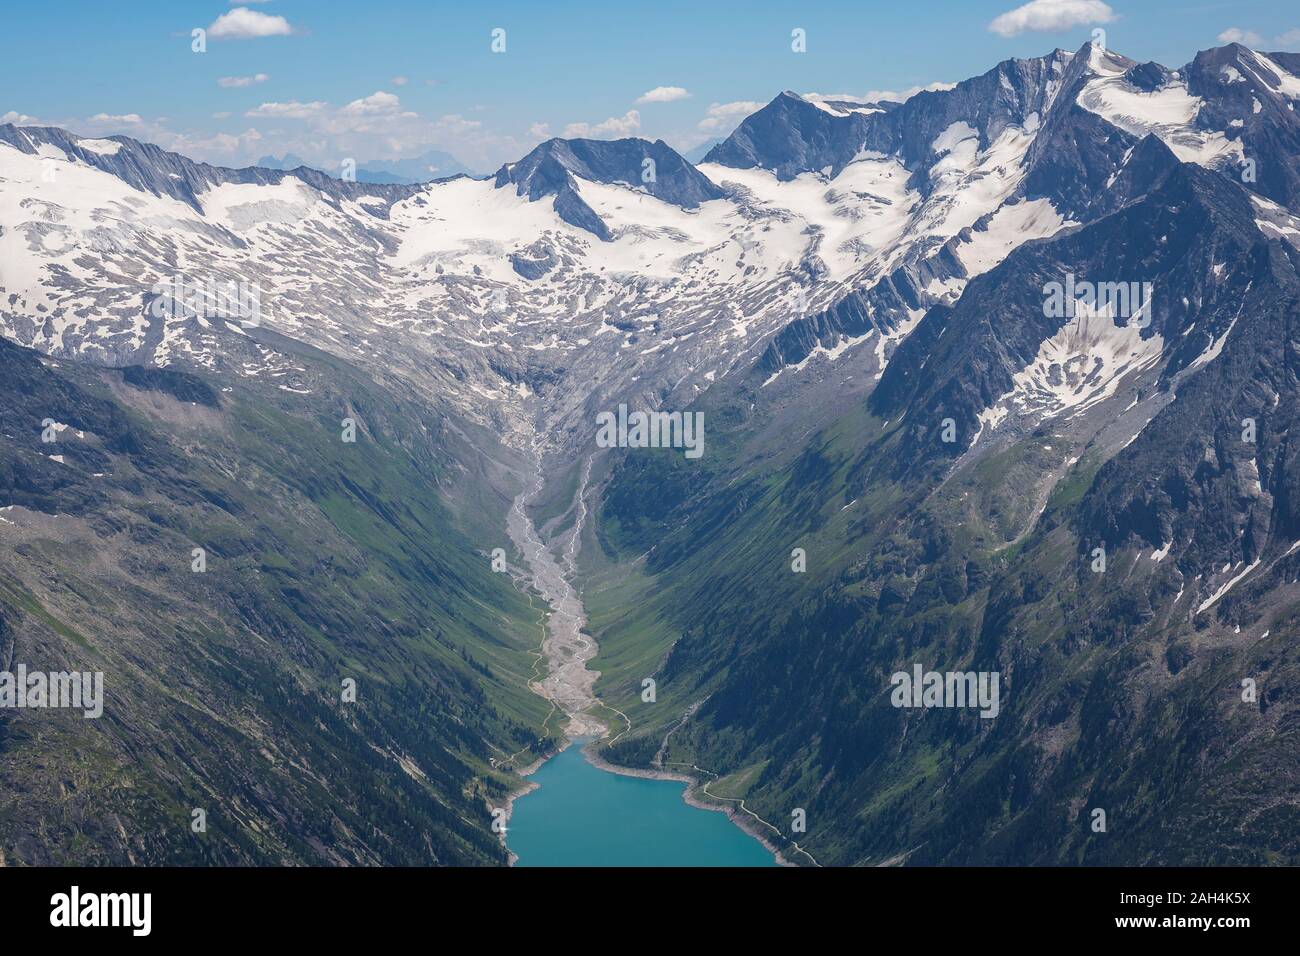 'Schlegeis glacier' and blue lake in Tirol at the border of Italy and Austria Stock Photo